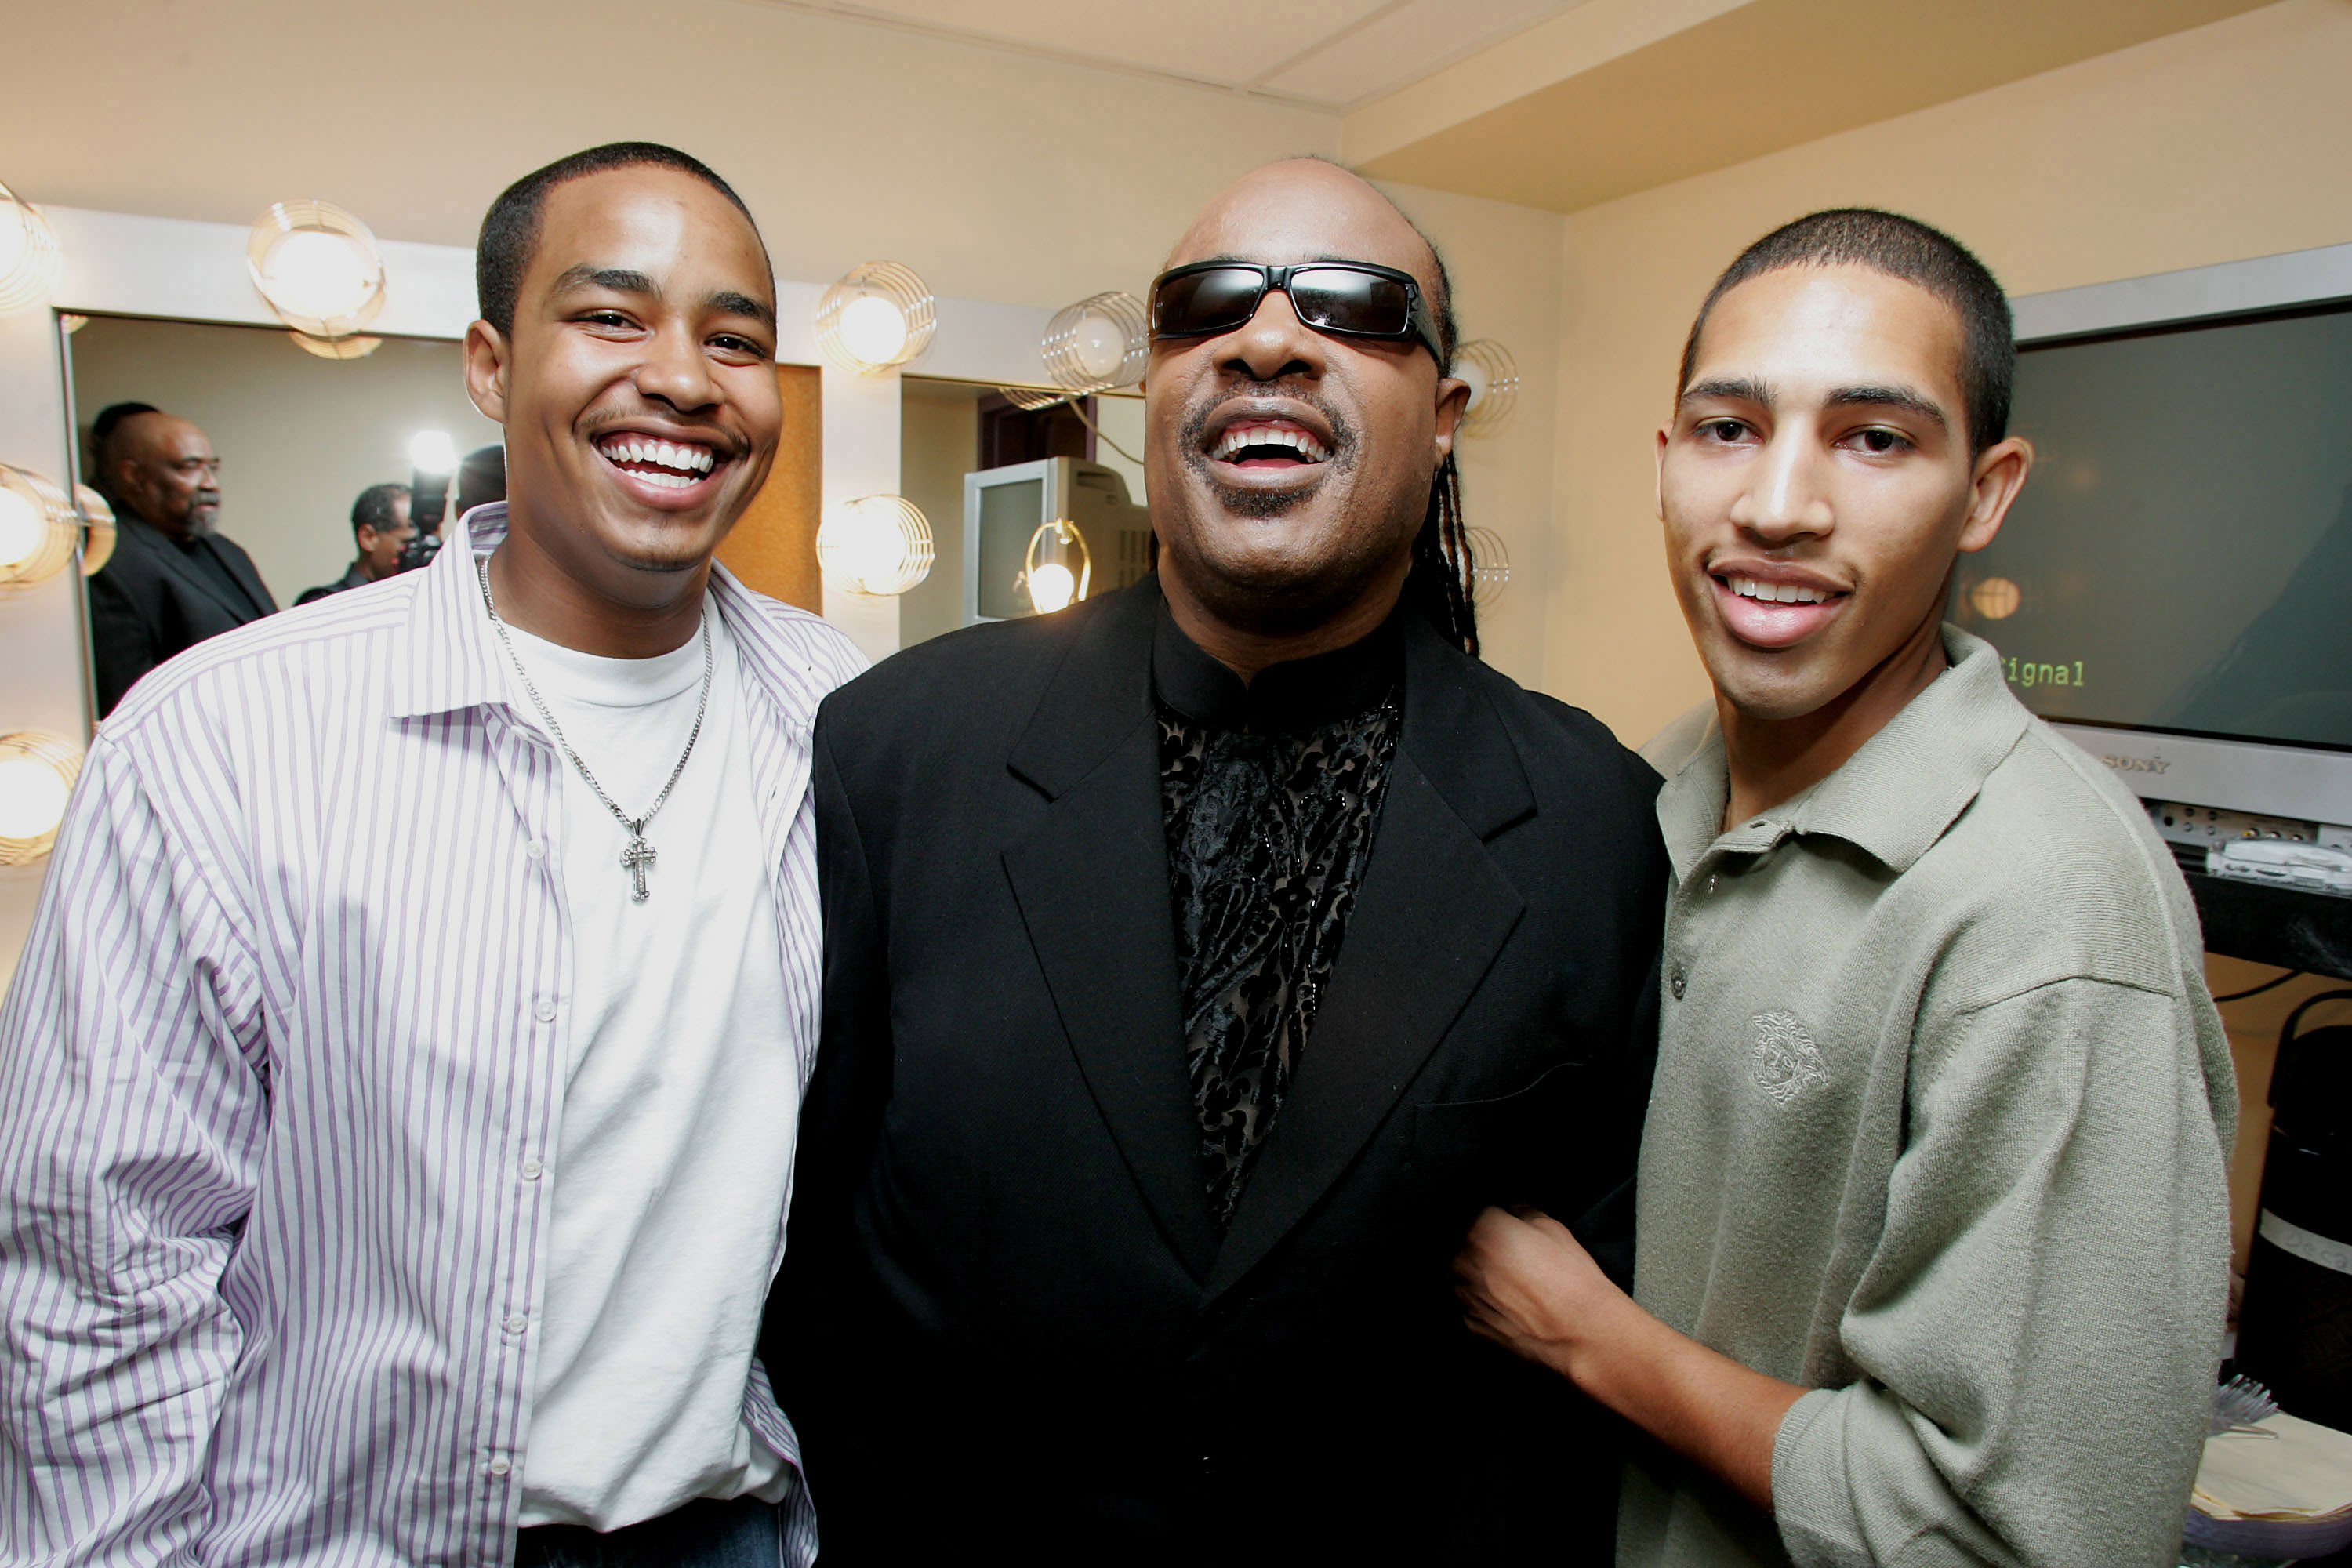 Stevie Wonder and sons Kwame and Chad during The United Negro College Fund Hosts An Evening of Stars Tribute to Quincy Jones in Hollywood, California, on September 11, 2004 | Source: Getty Images